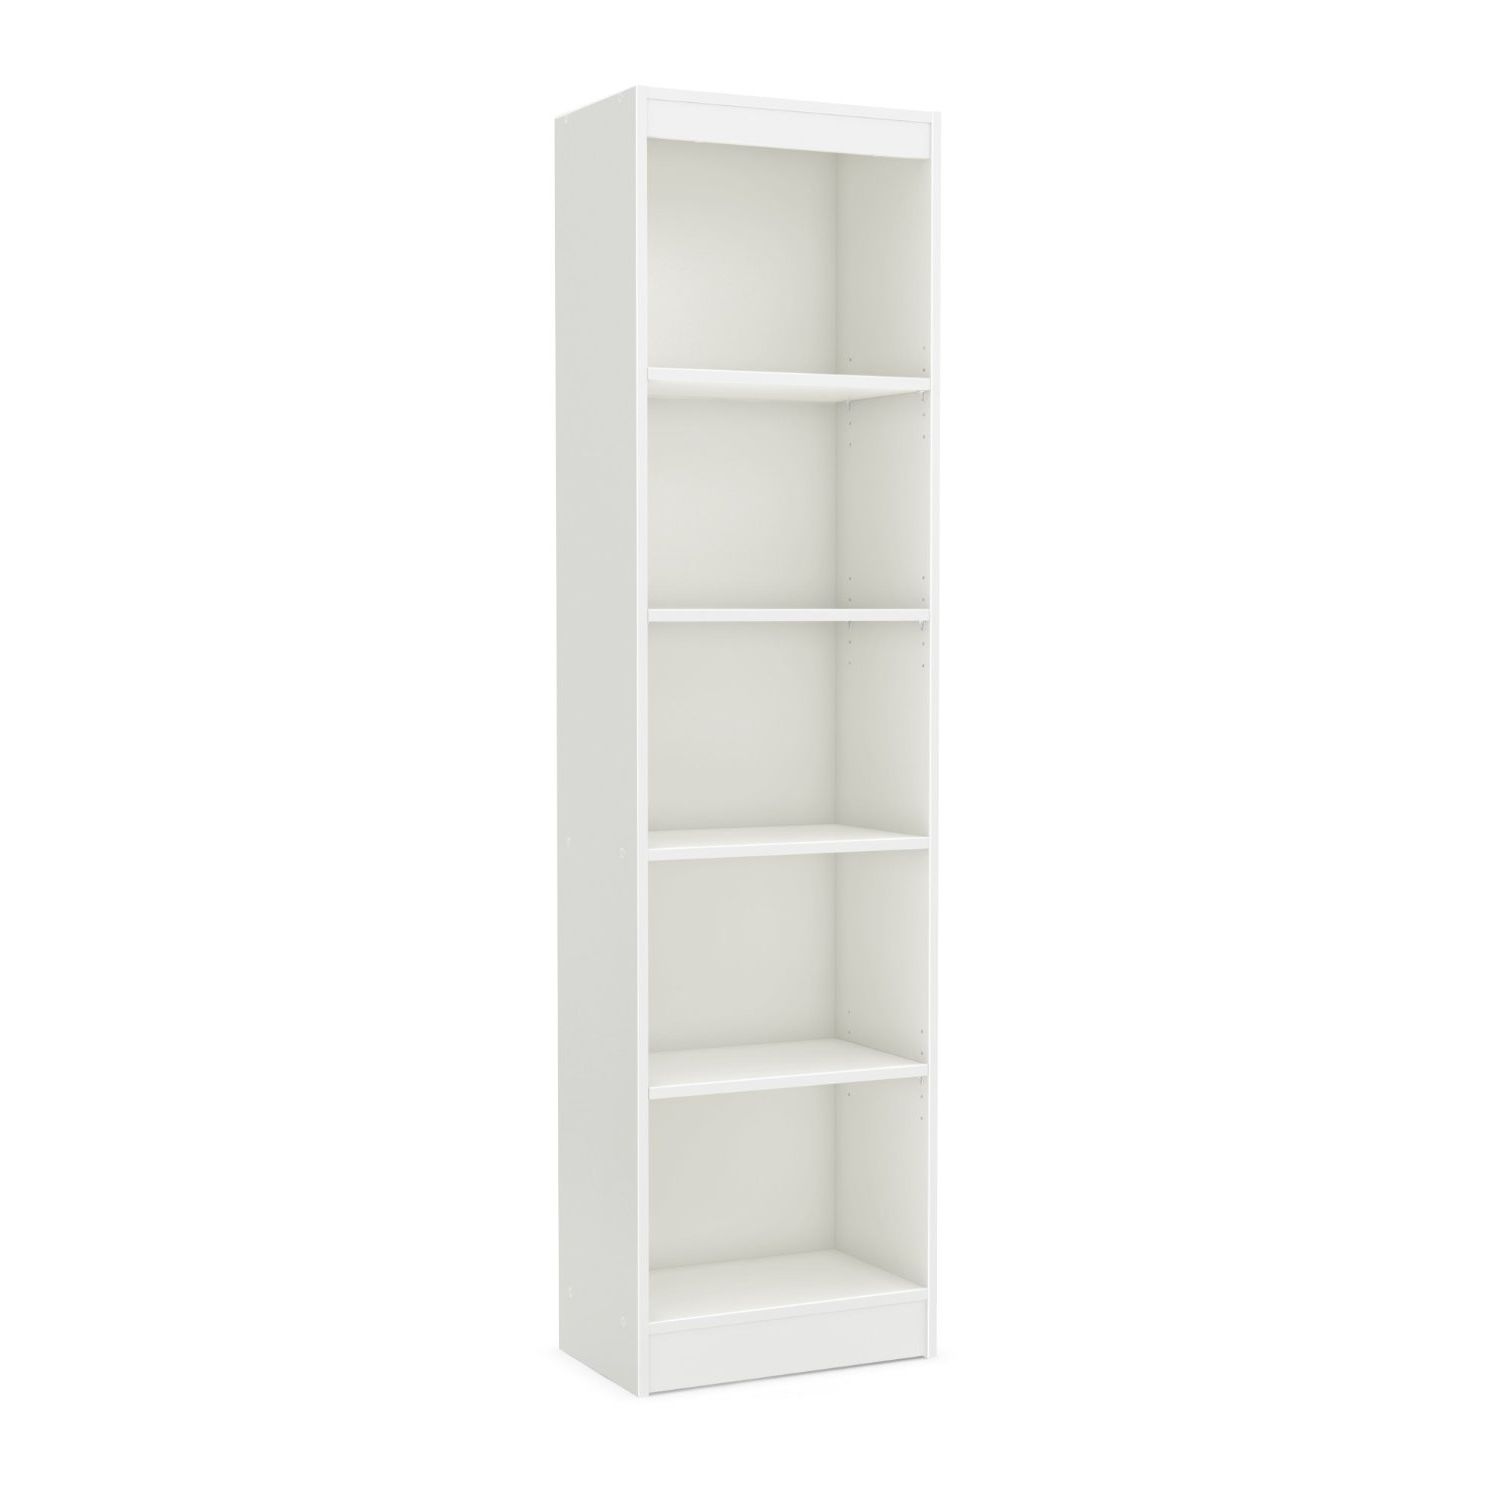 Most Recent Top 30 Collection Of White Bookcases And Bookshelfs With Regard To Narrow Bookcases (View 12 of 15)